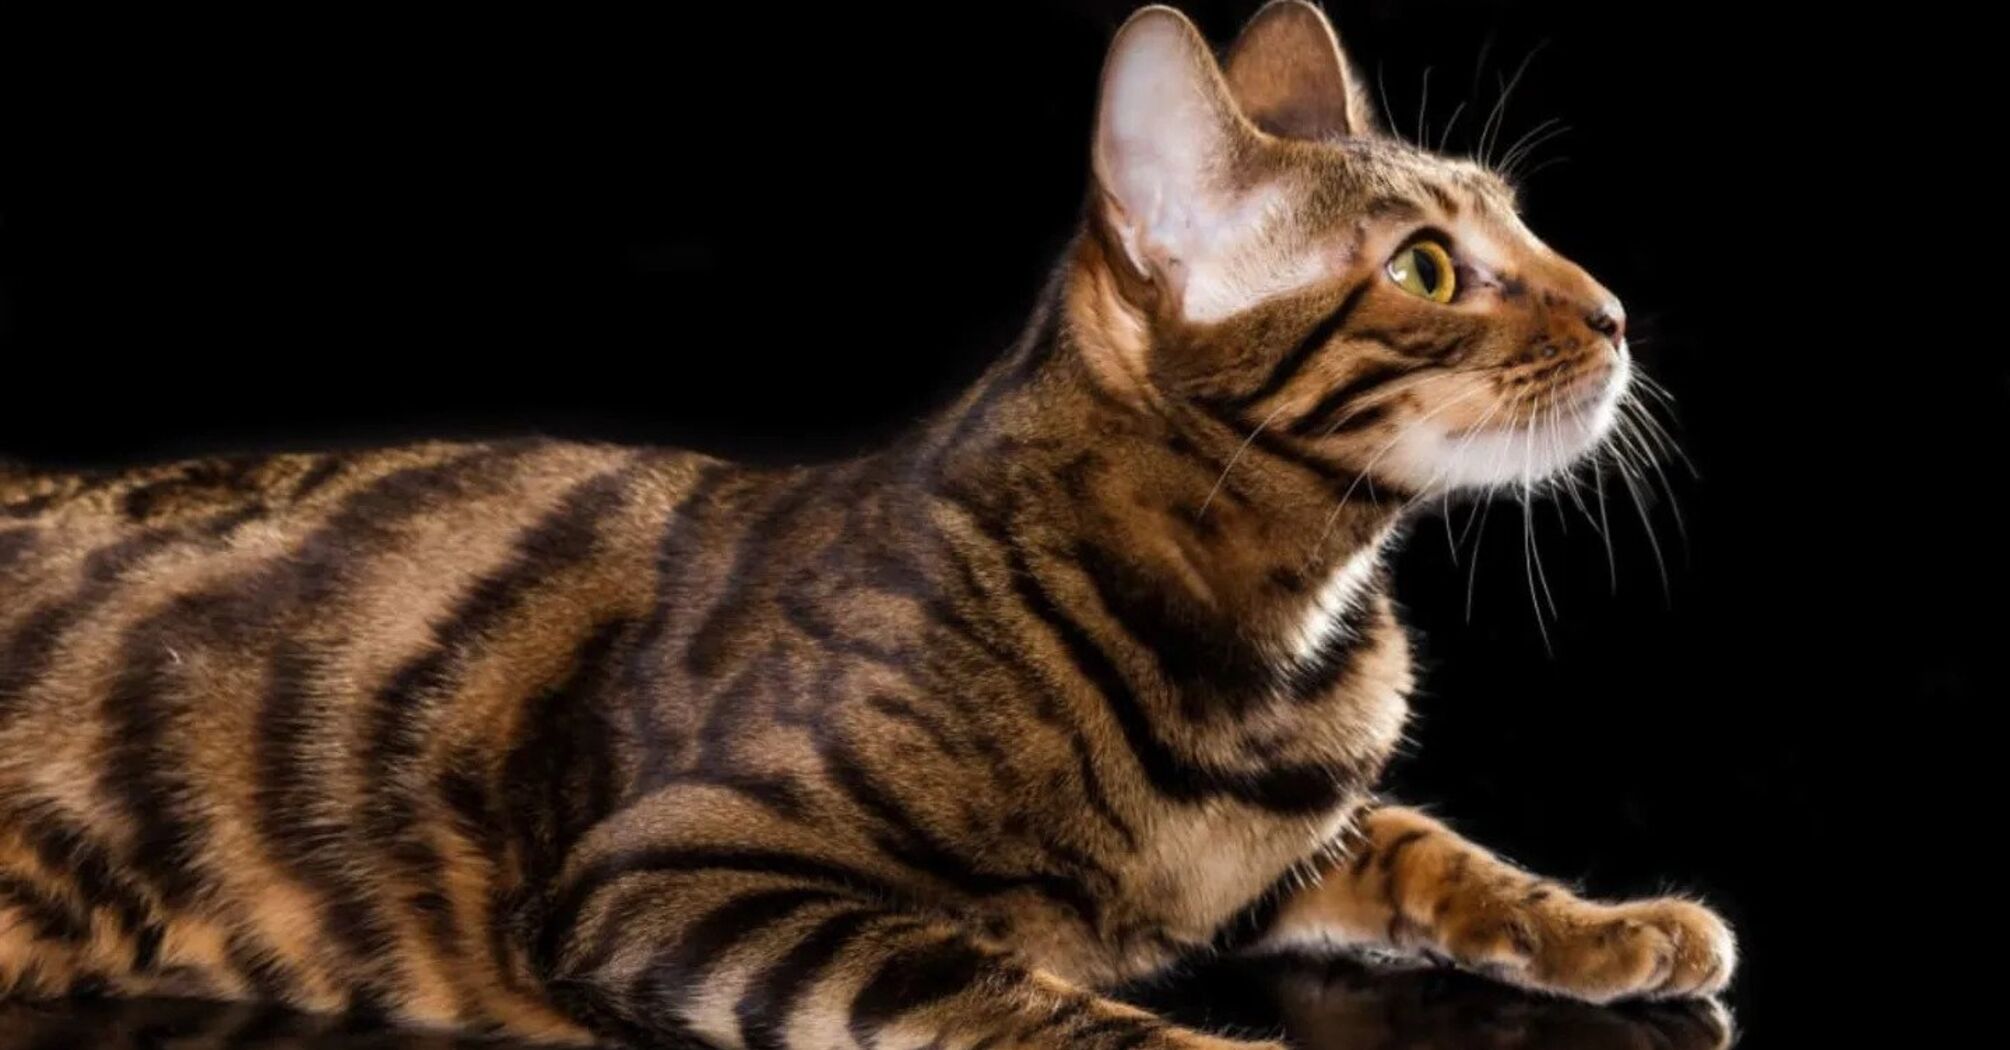 5 most expensive breeds of "whiskered and striped"